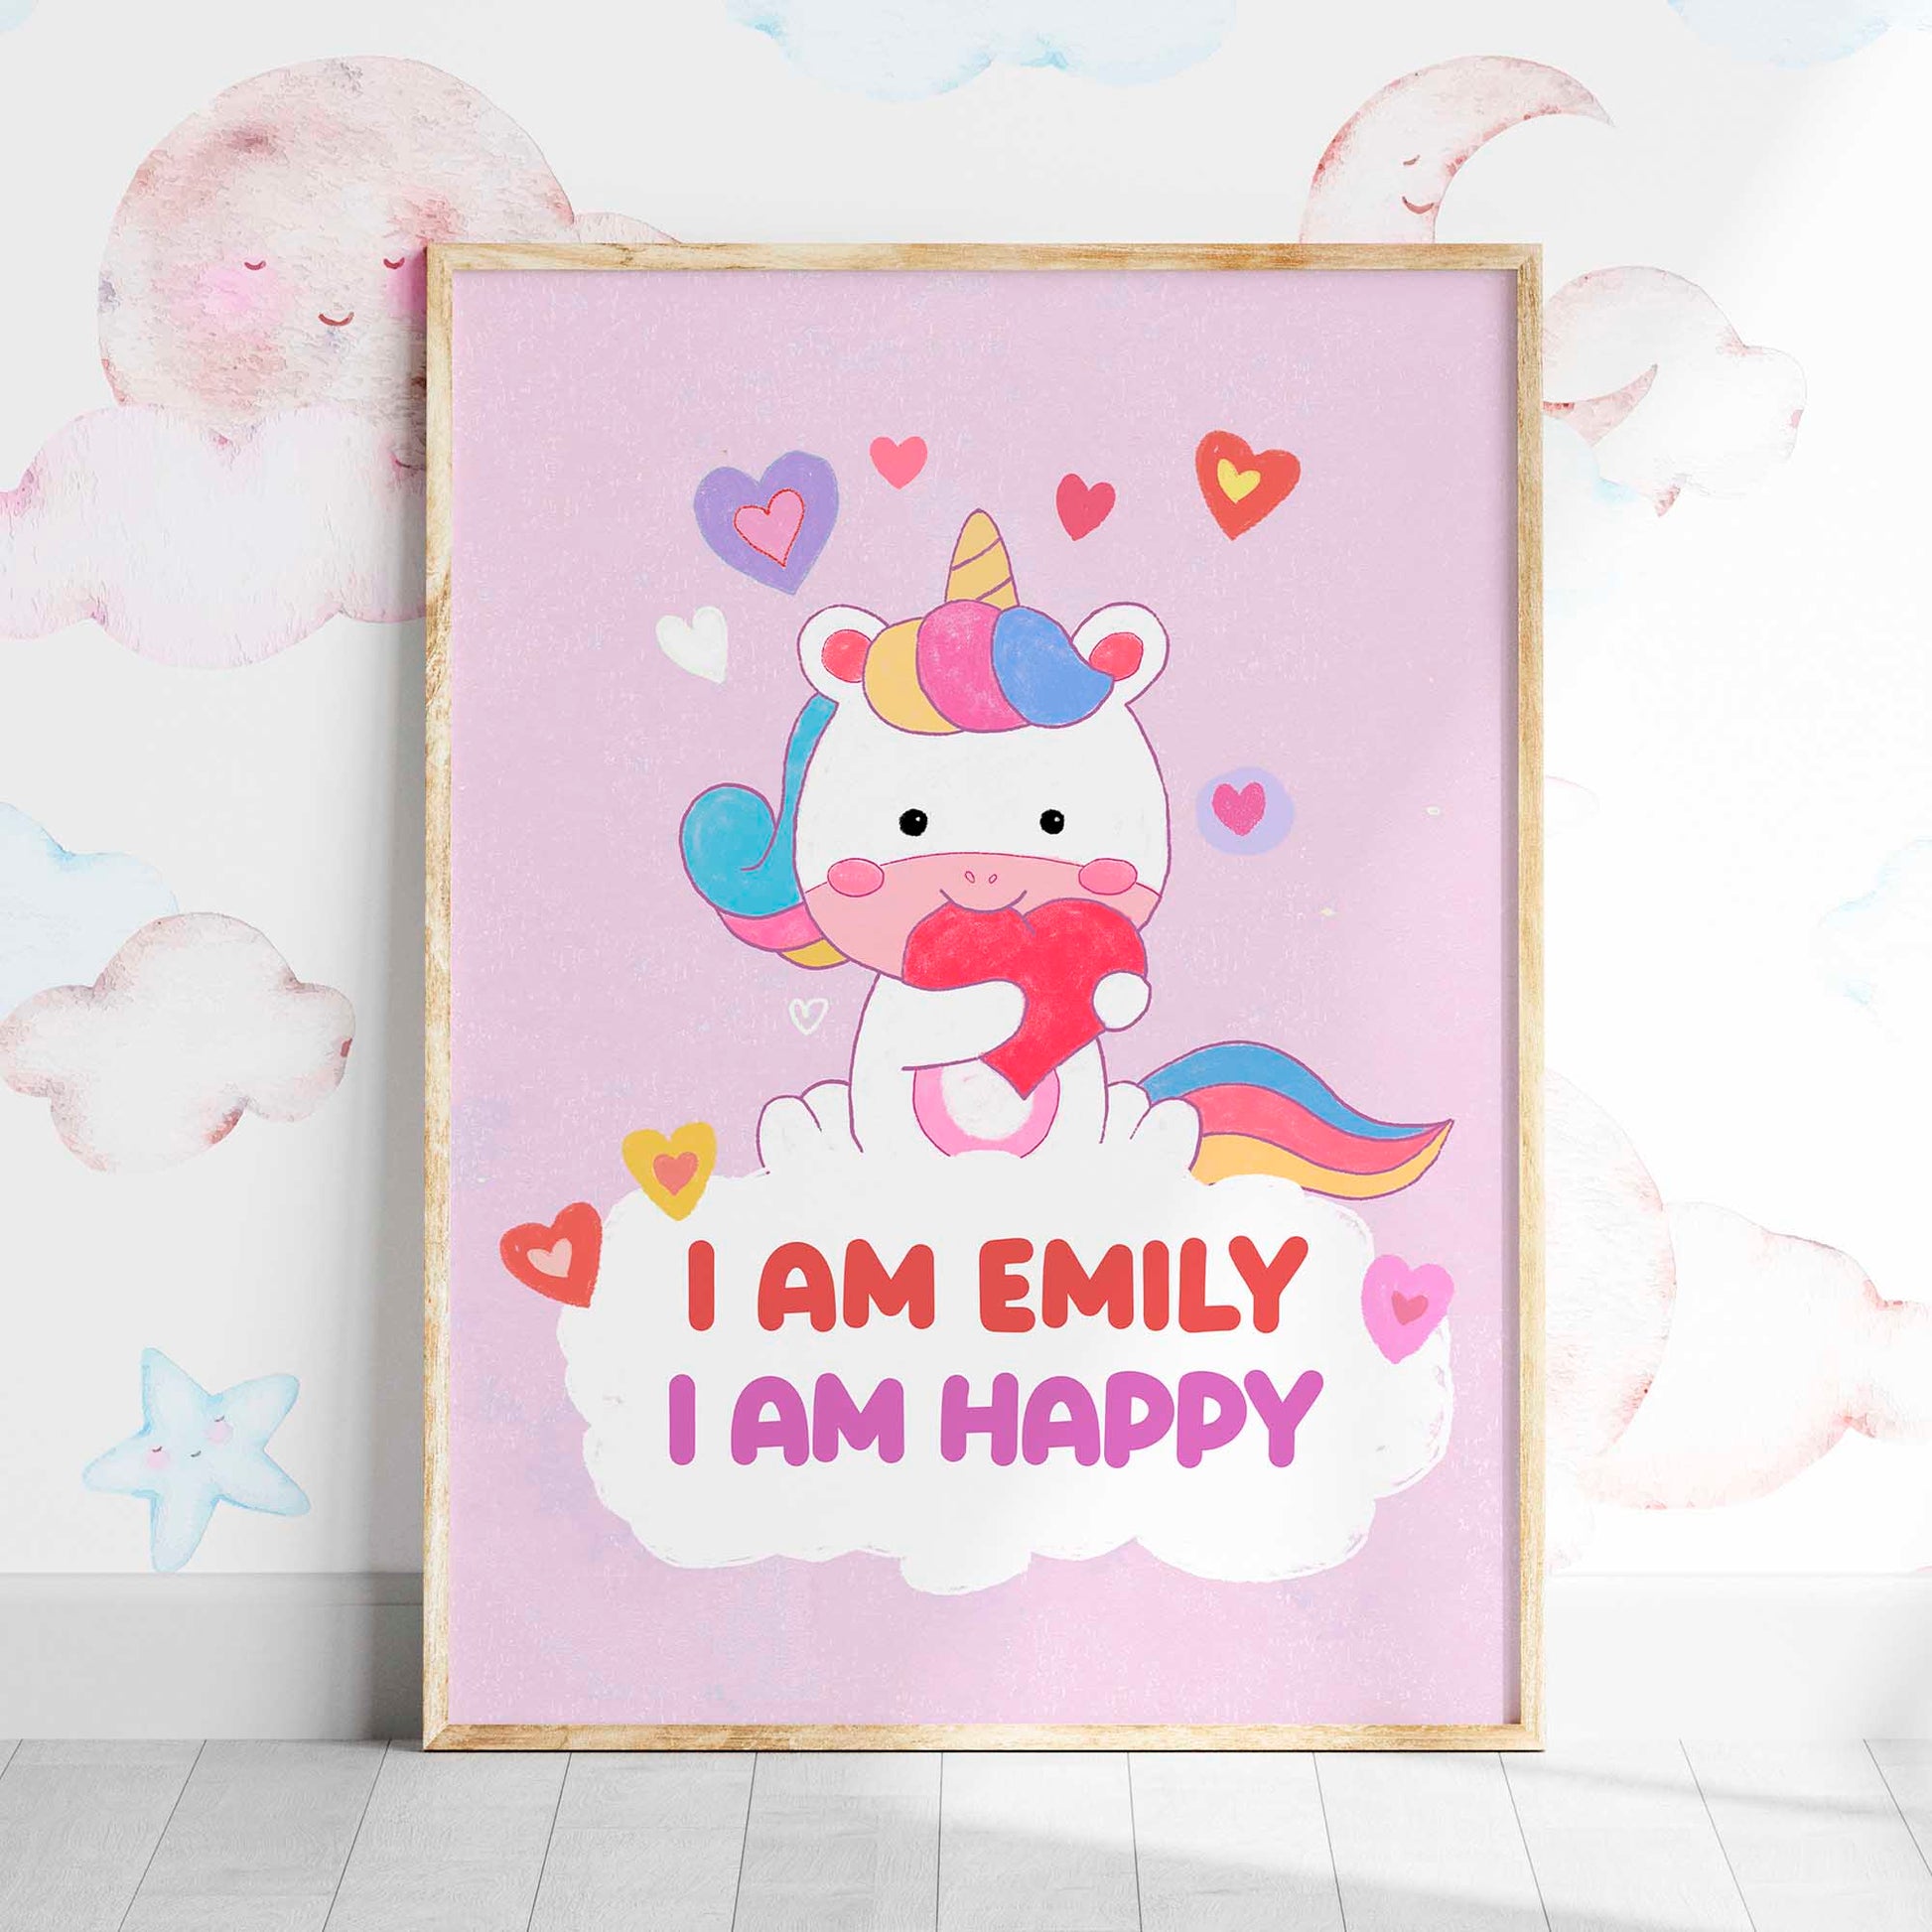 Playful unicorn framed poster with positive messages, perfect for a child's bedroom.